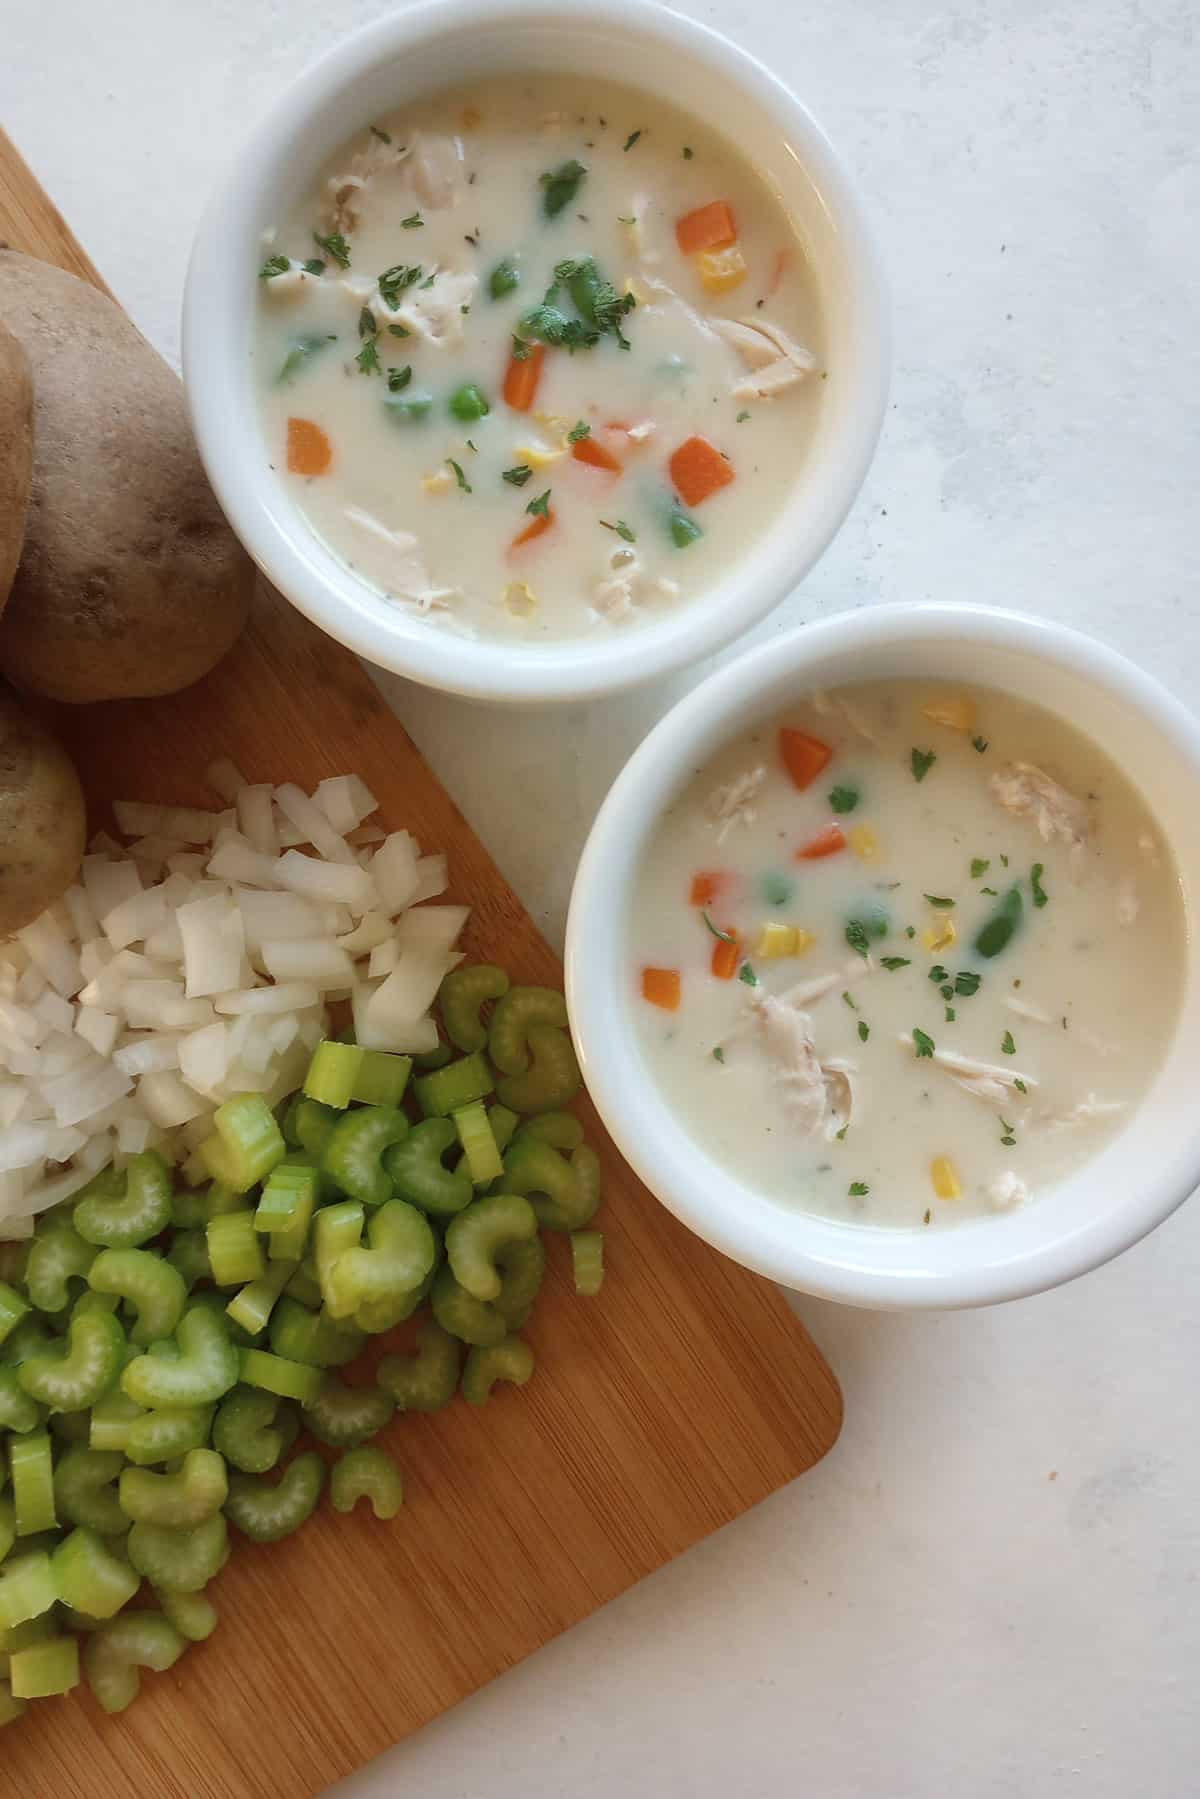 Healthy chicken potpie soup with roasted cauliflower or potatoes is so good!